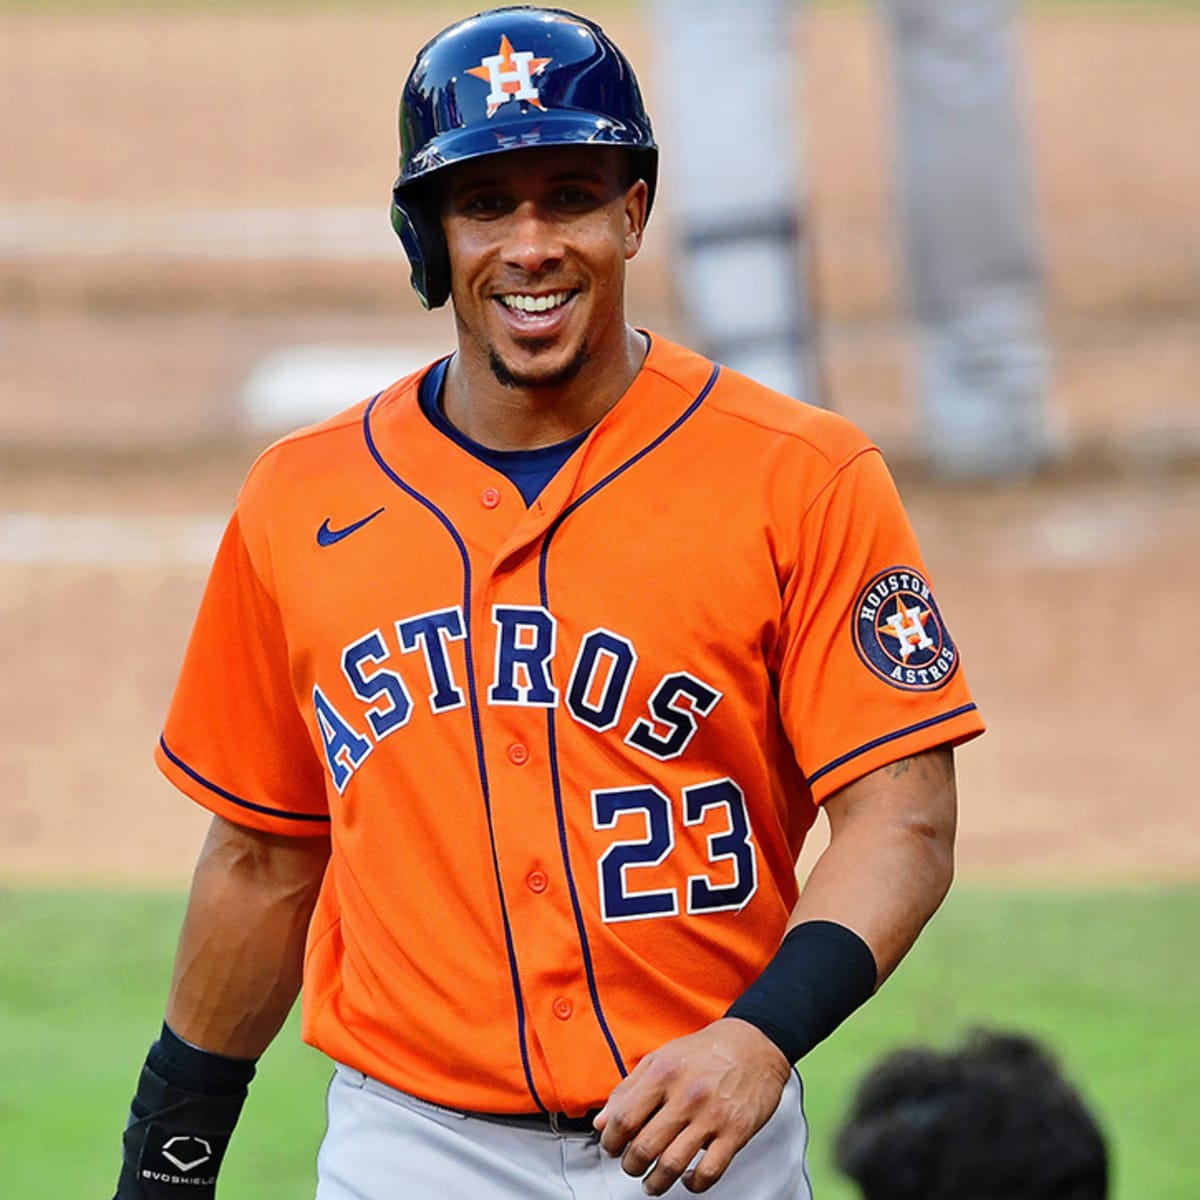 Astros sign Michael Brantley after losing out on George Springer